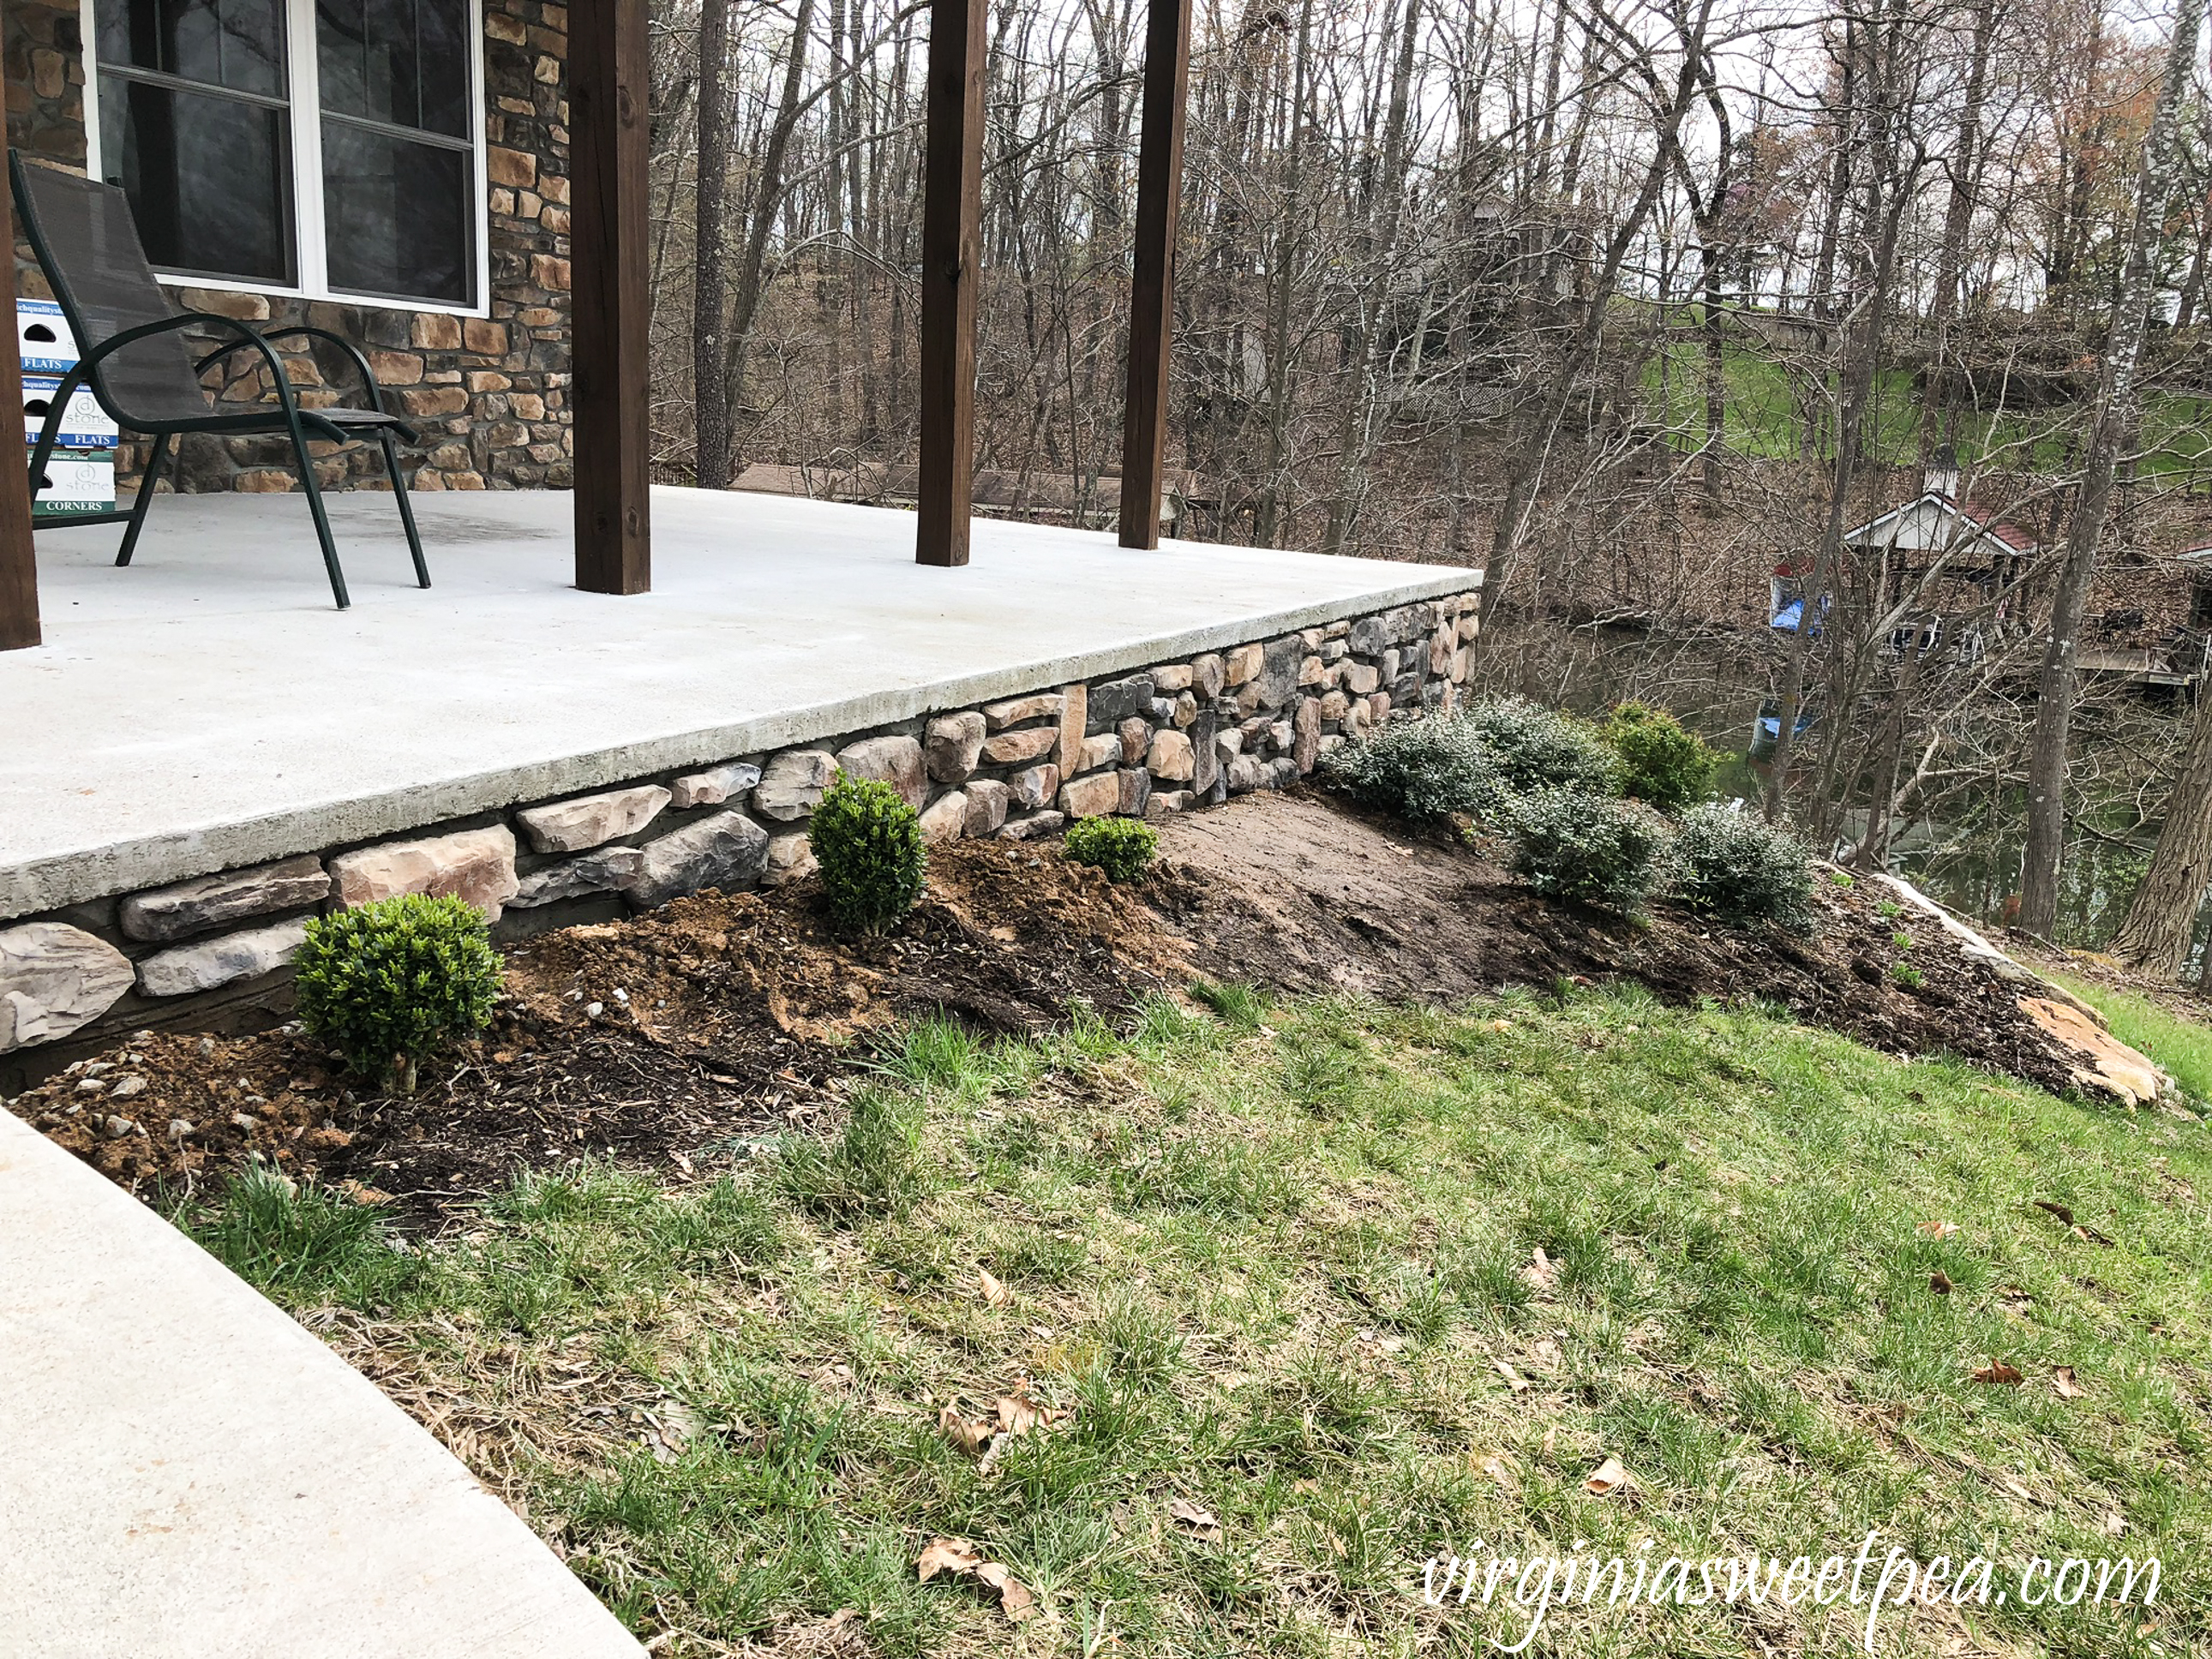 How to add stone veneer added to a patio wall